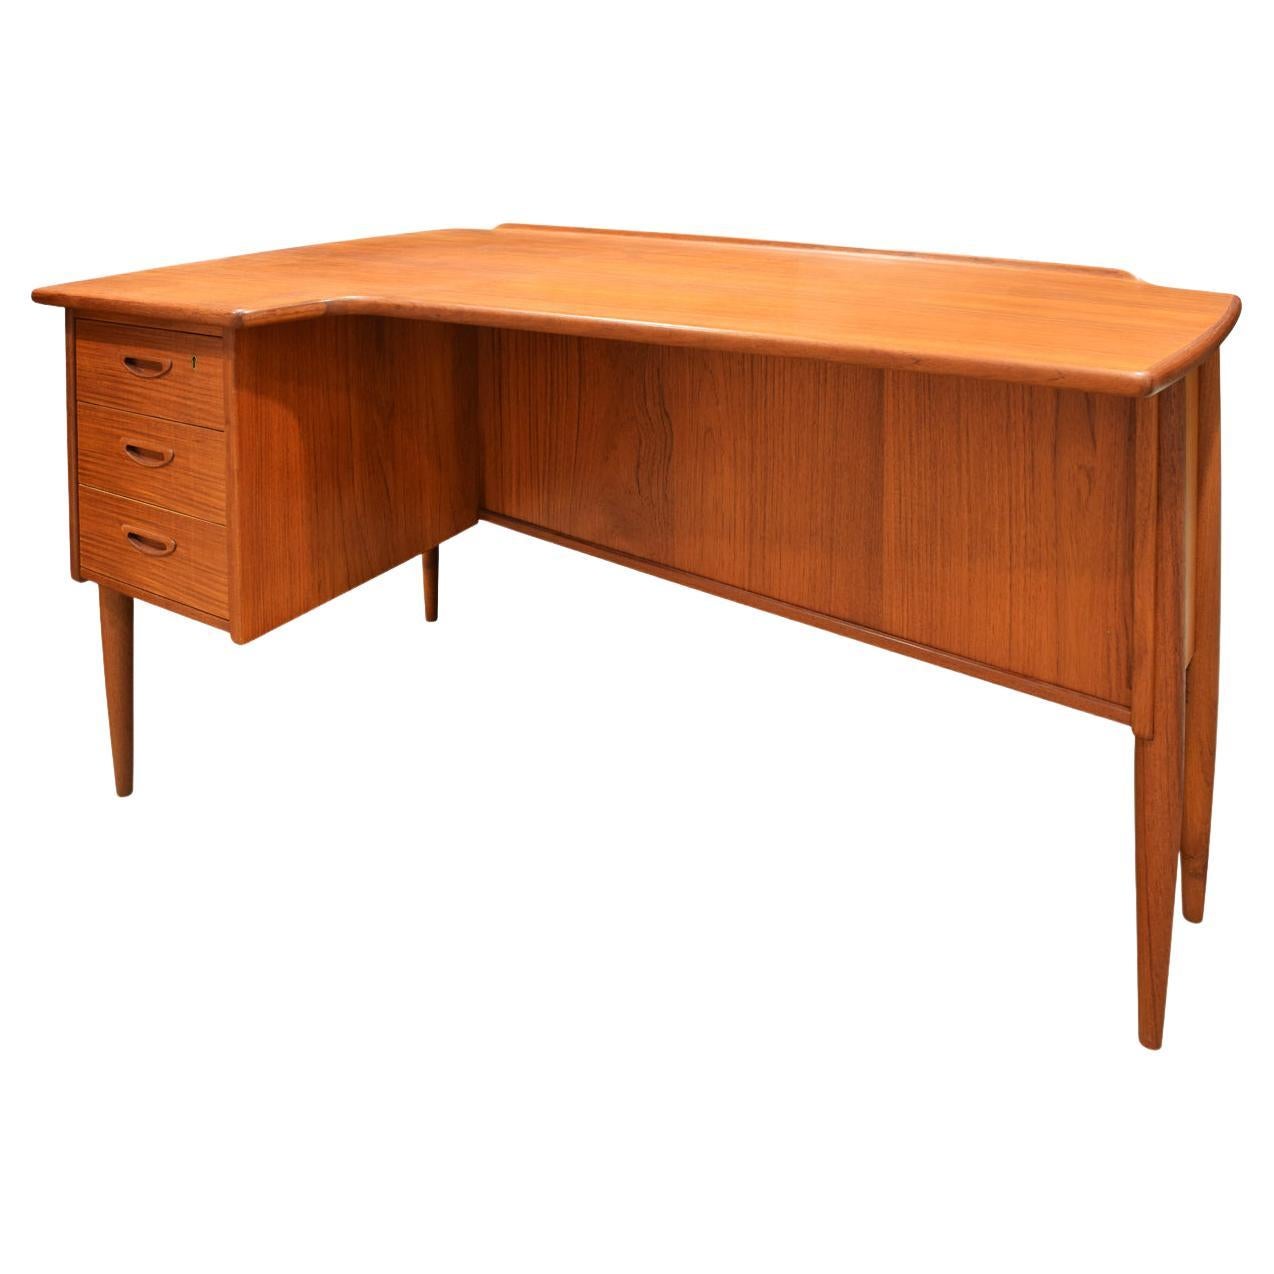 Beautifully Crafted Swedish Desk in Teak, 1960s For Sale